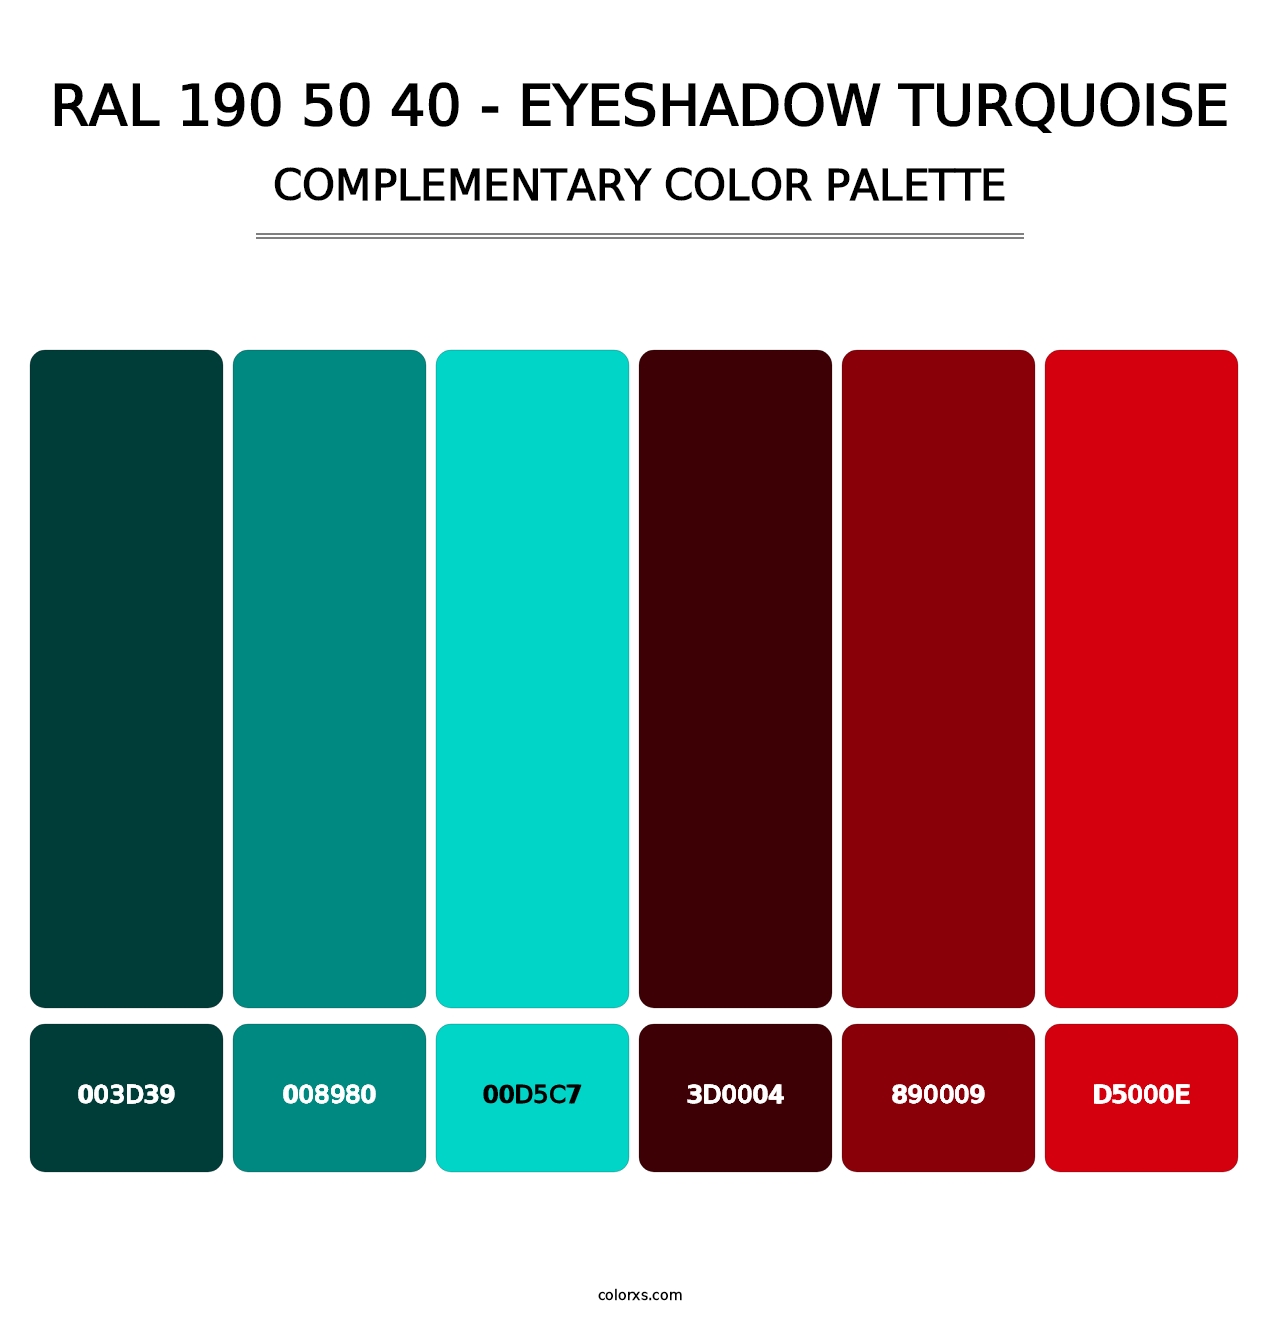 RAL 190 50 40 - Eyeshadow Turquoise - Complementary Color Palette